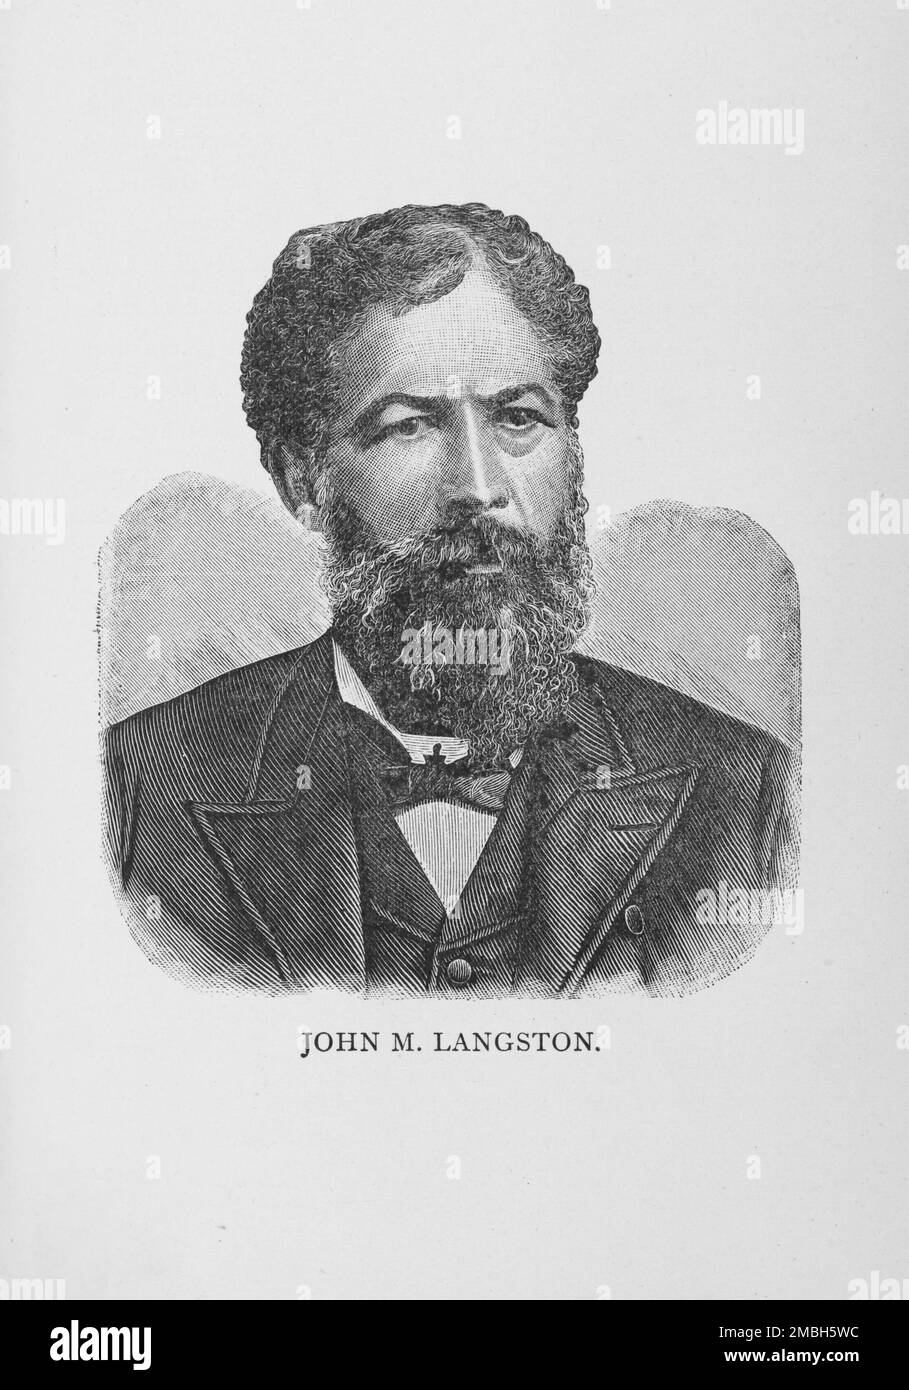 John M. Langston, 1887. John Mercer Langston, African-American abolitionist, lawyer, activist, diplomat, and politician: founding dean of the law school at Howard University. From &quot;Men of Mark: Eminent, Progressive and Rising&quot; by William J. Simmons. Stock Photo